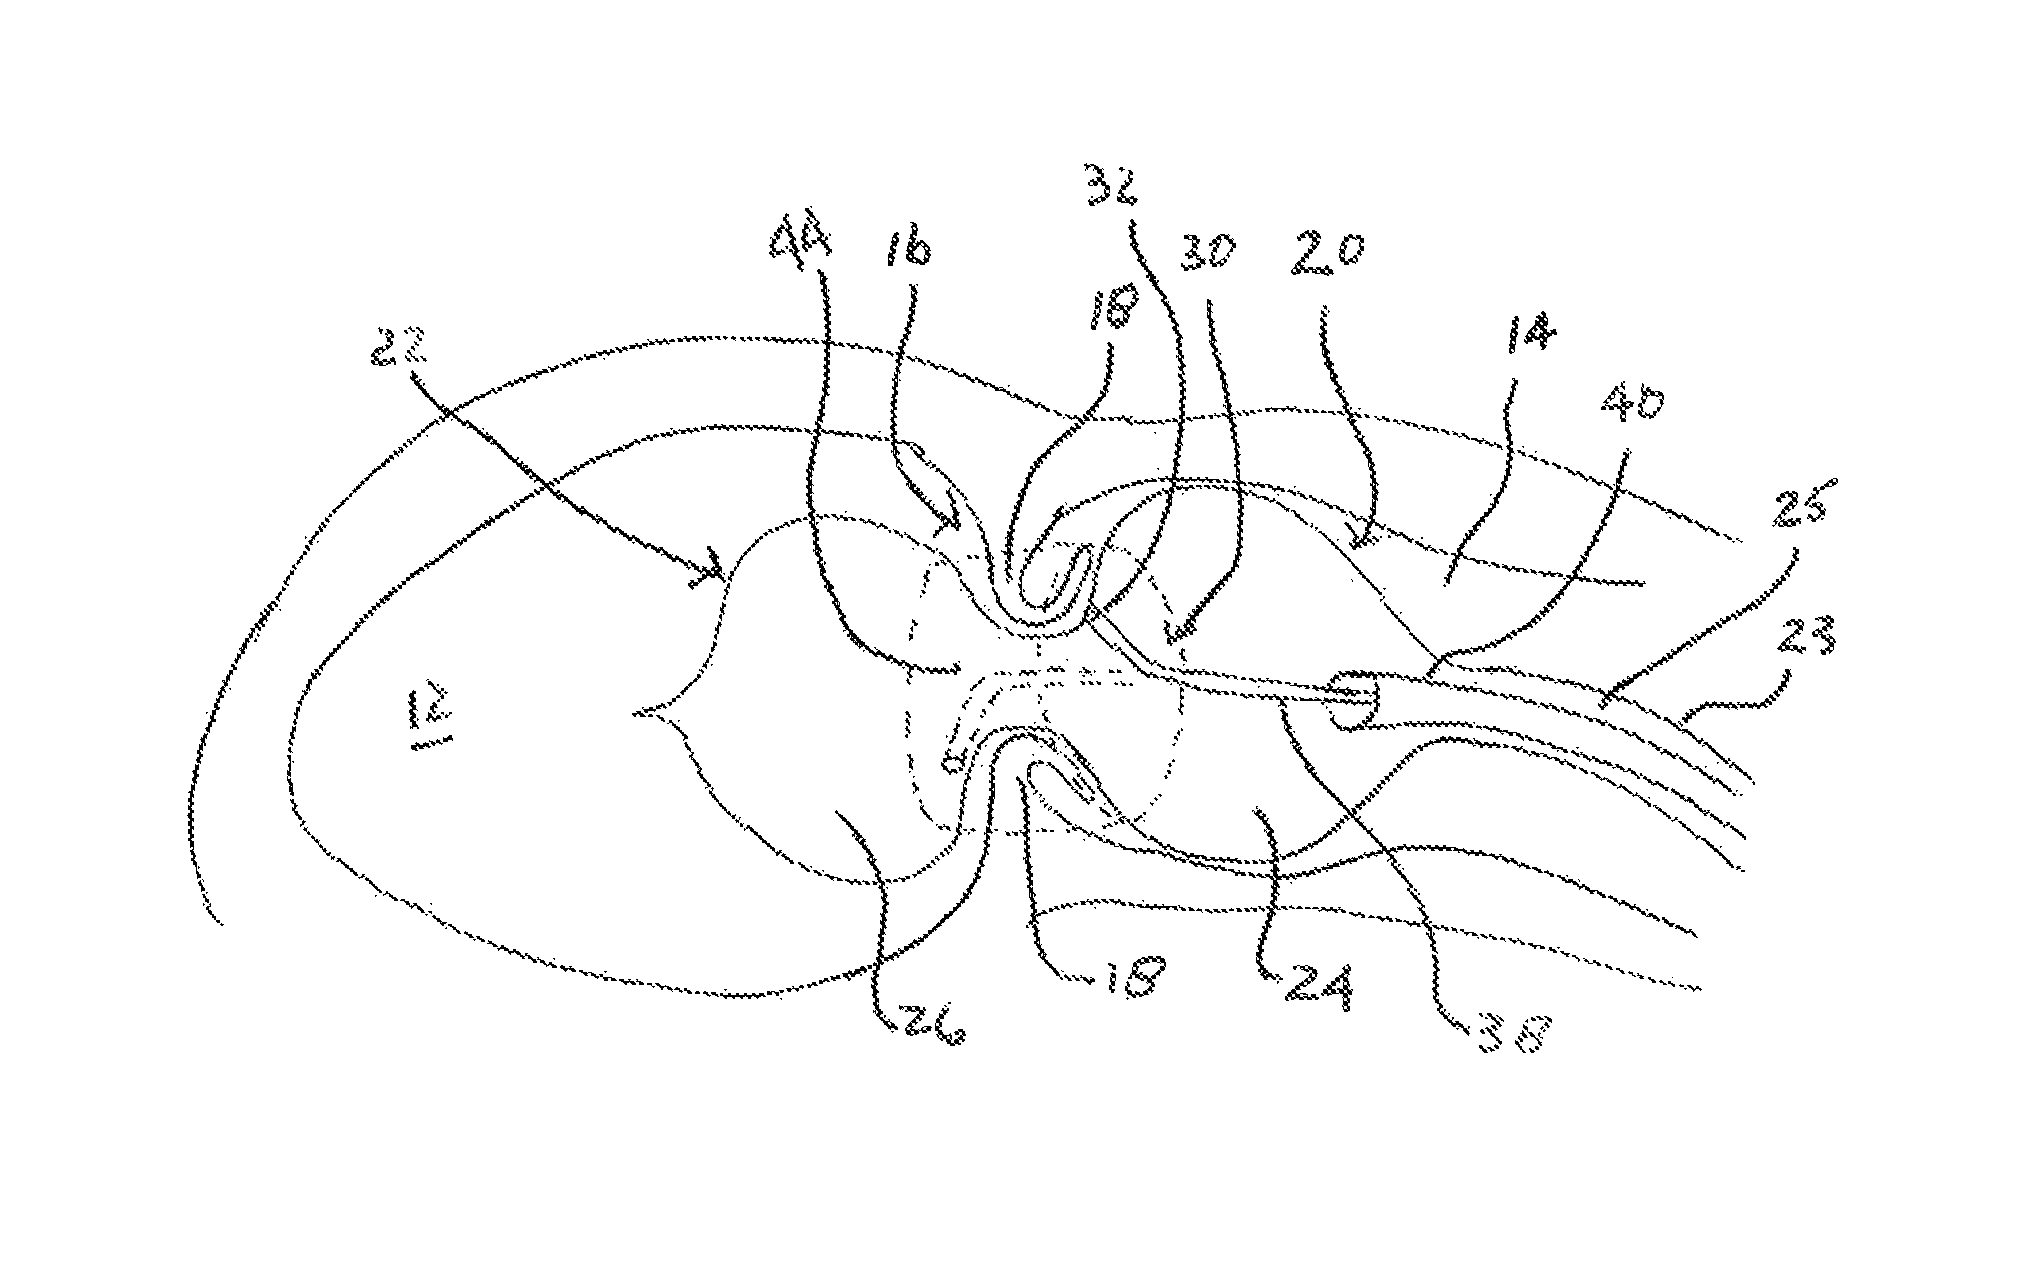 Shock wave valvuloplasty device with moveable shock wave generator